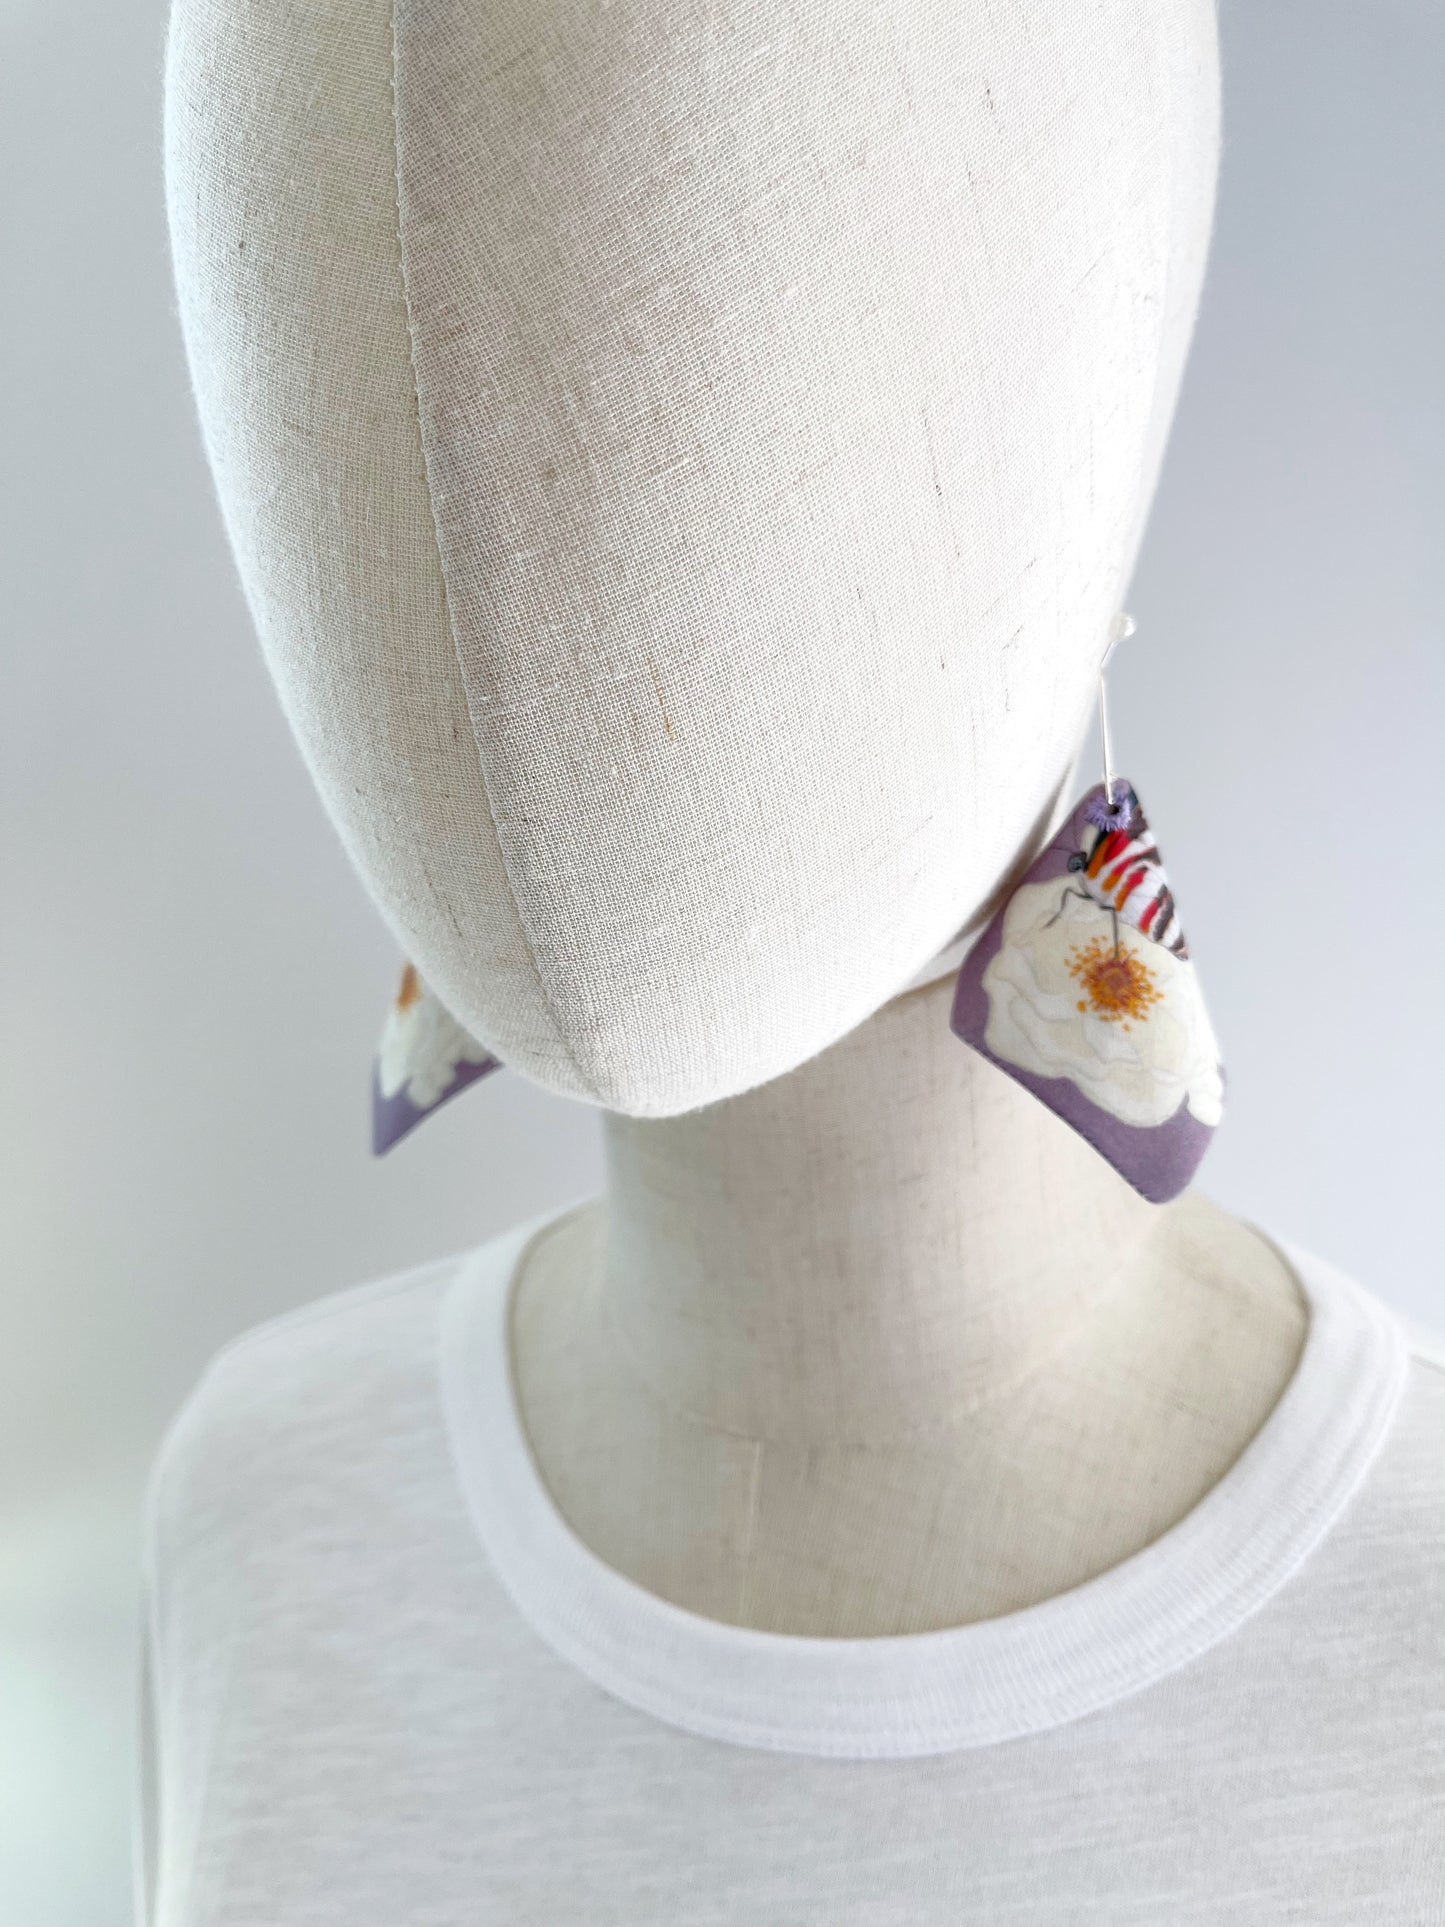 AE. White Roses with butterflies on lavender large cone shaped cotton statement earrings